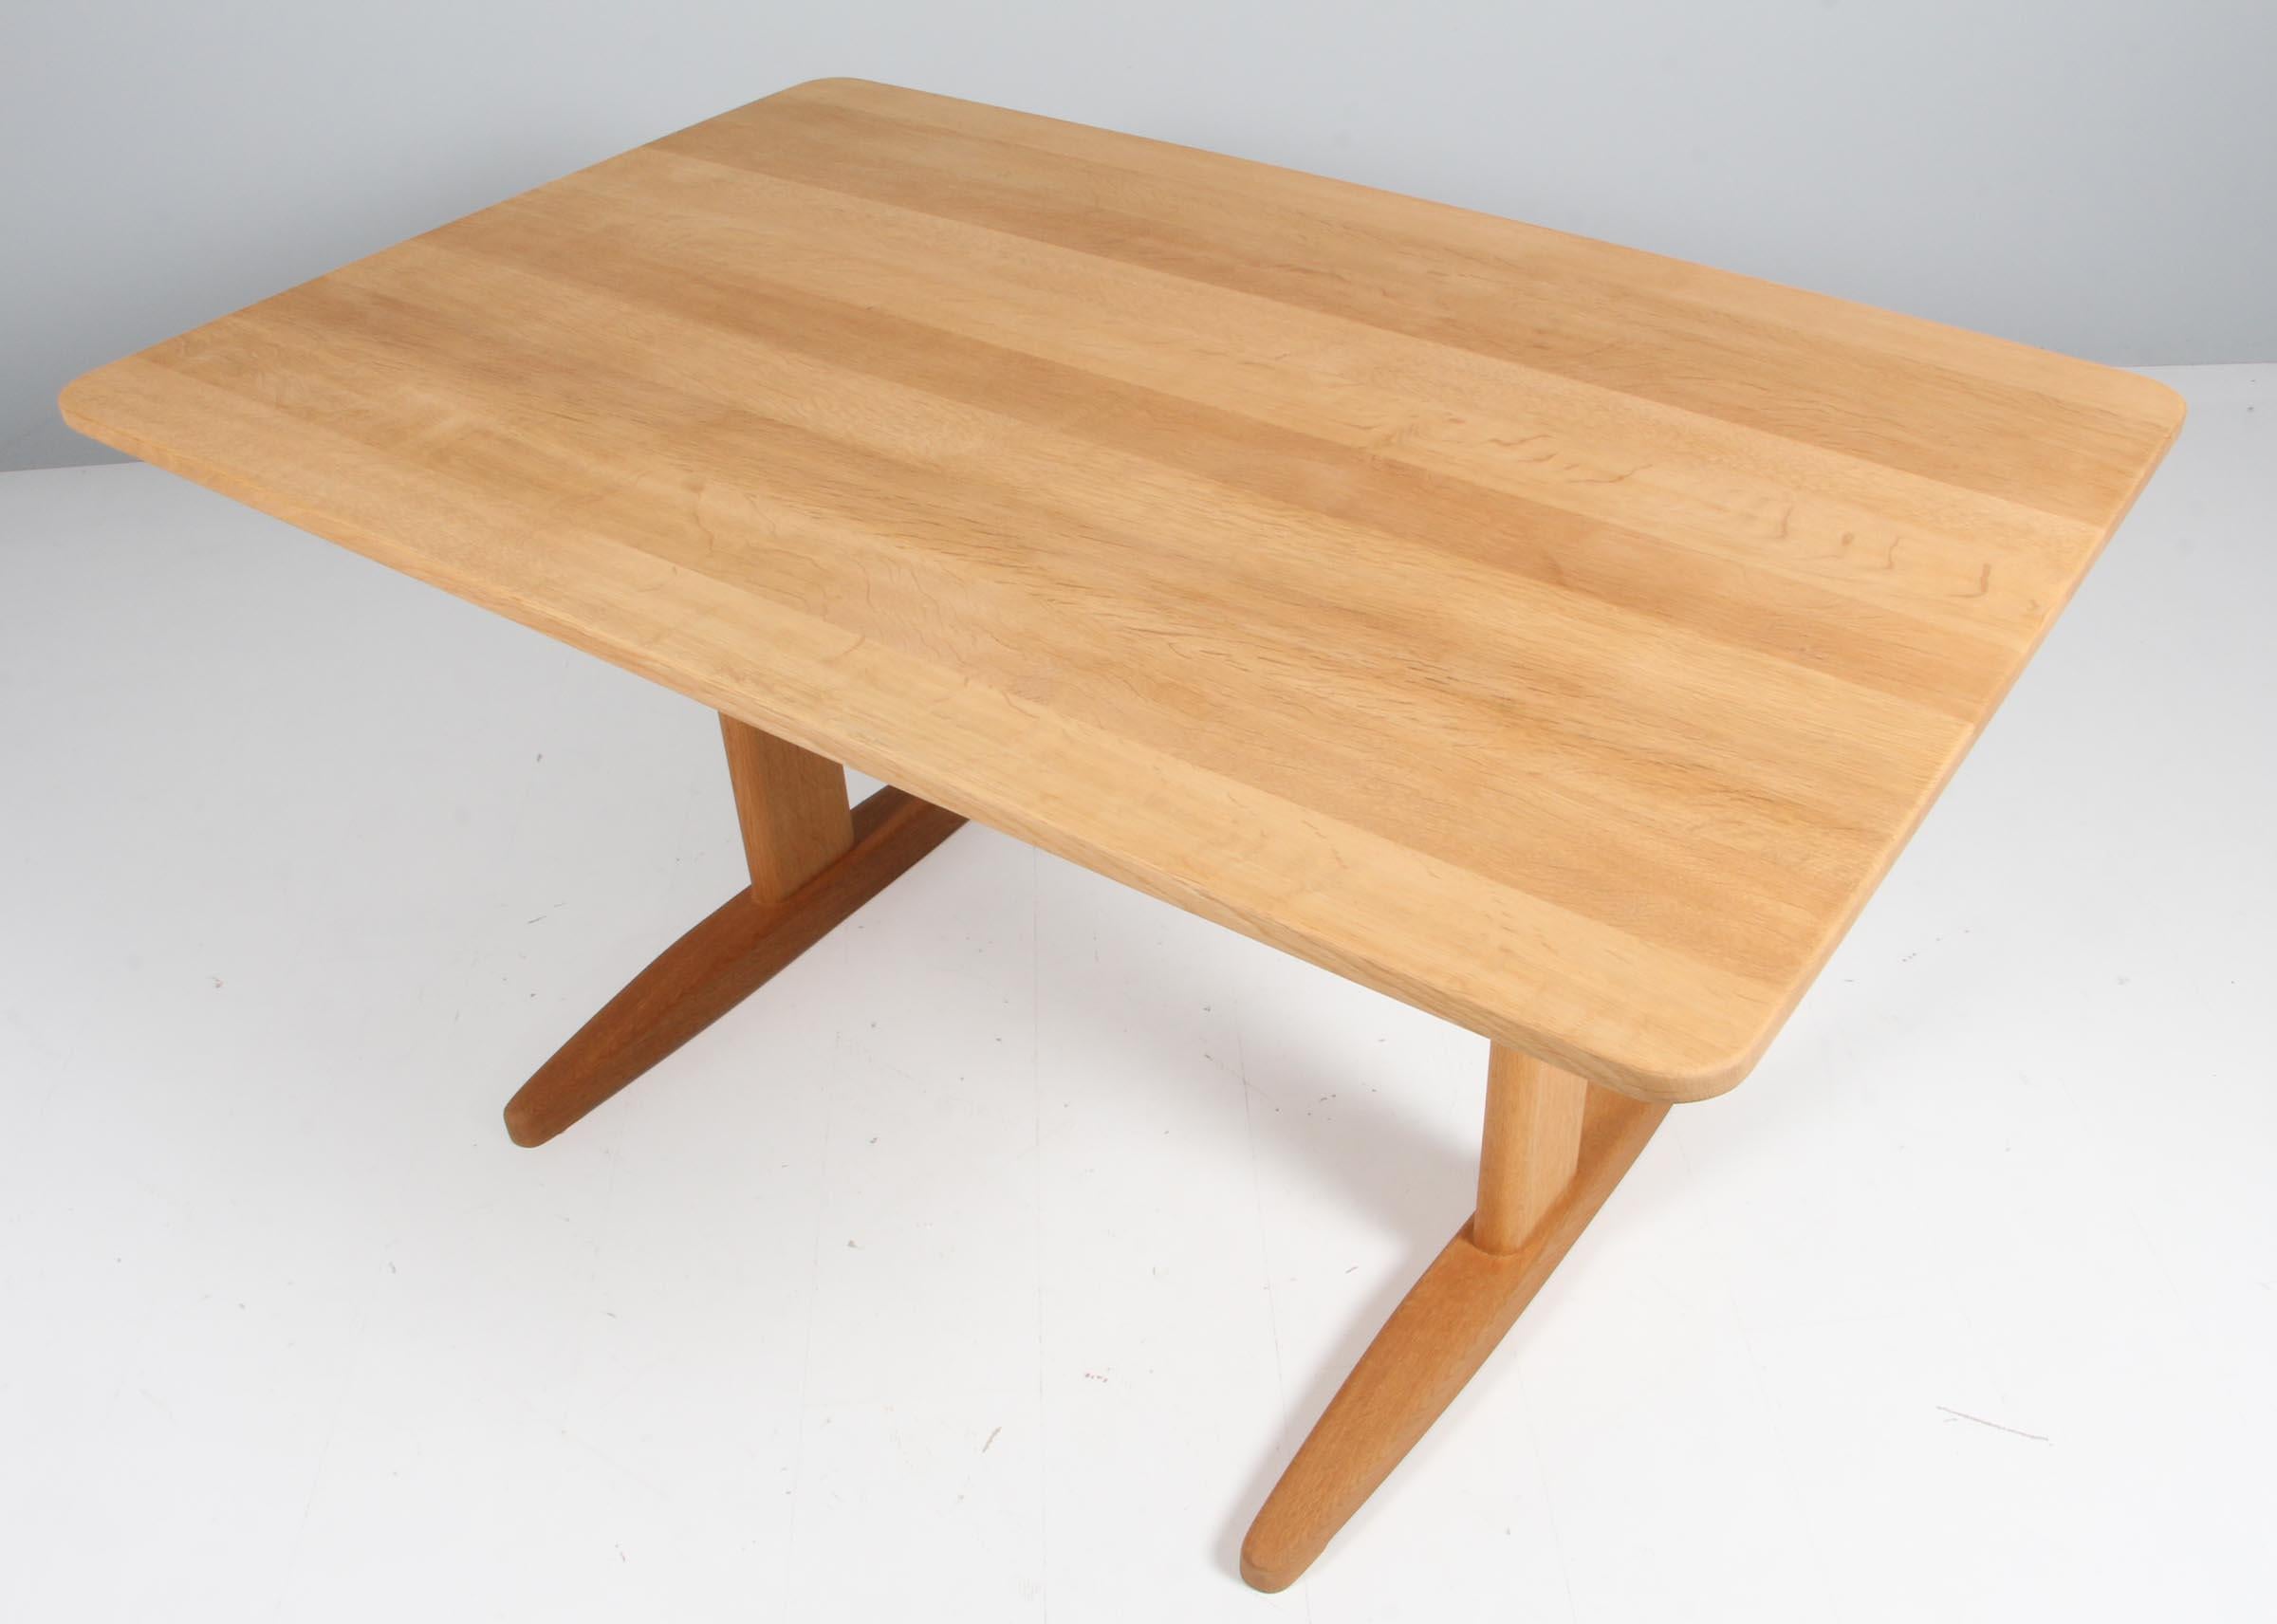 Børge Mogensen shaker dining table in solid soap treated oak. 

Made by C.M. Madsen, model 1181.